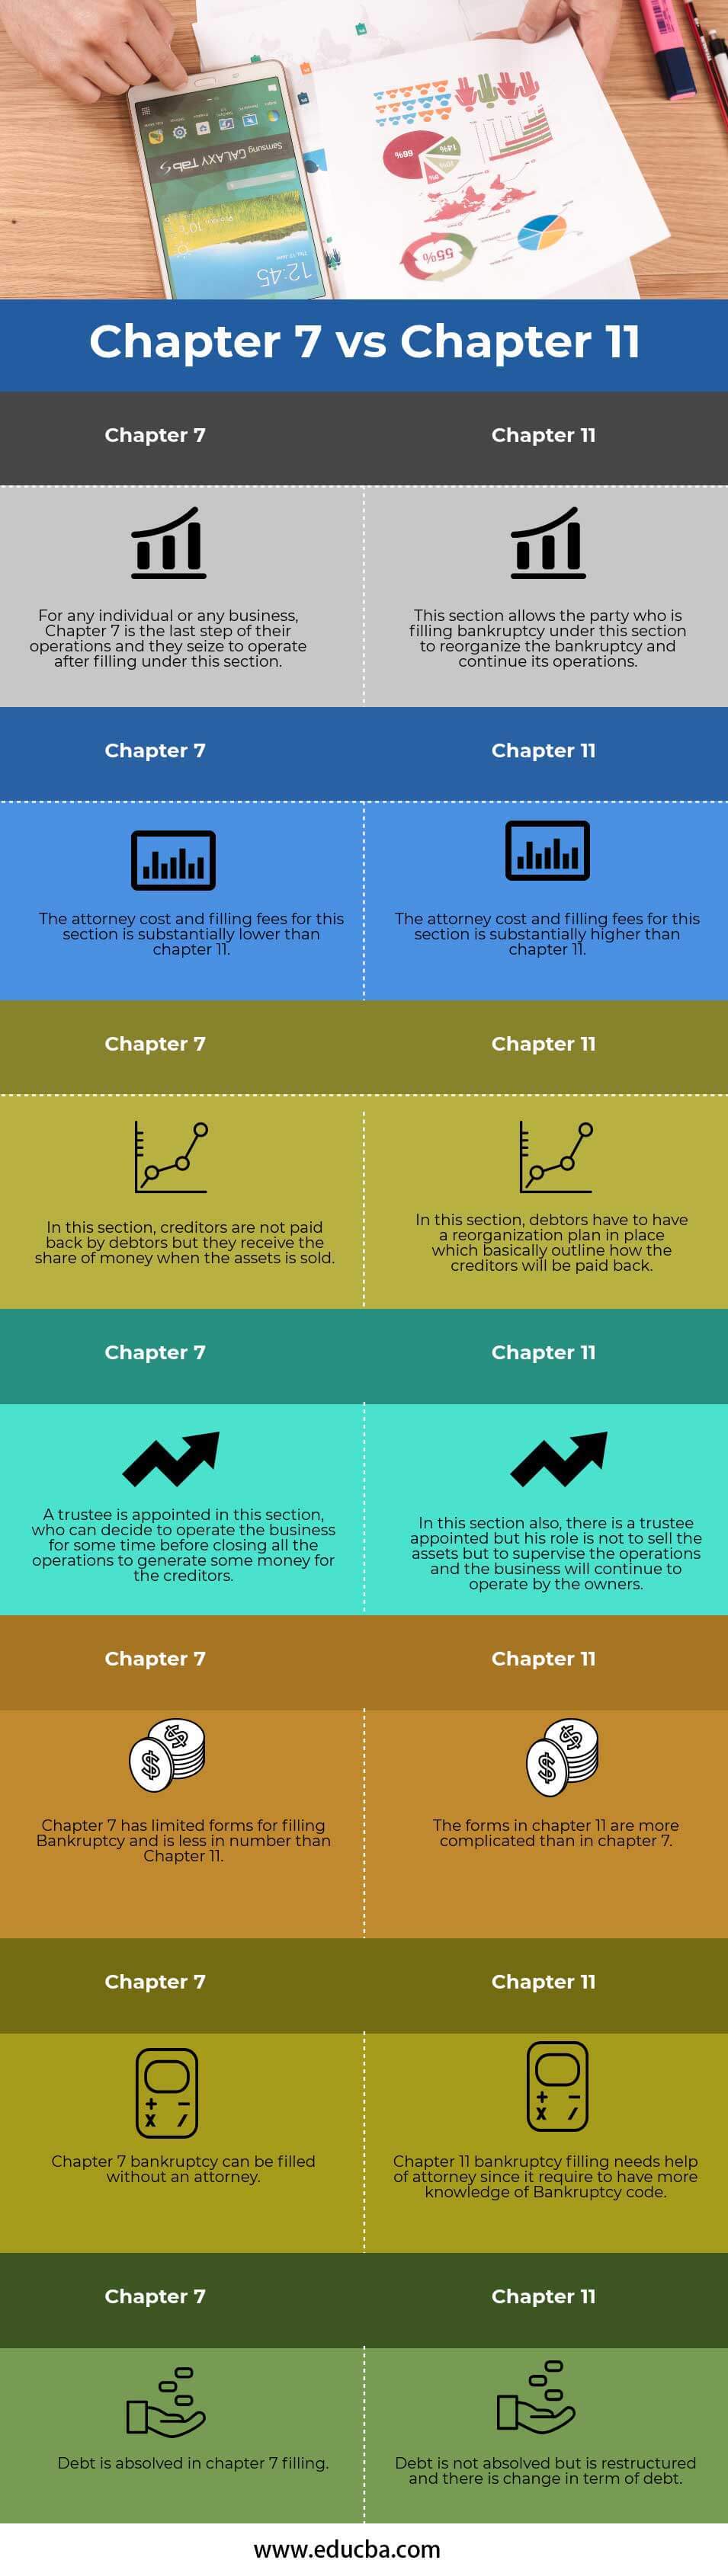 Chapter 7 vs Chapter 11 Infography